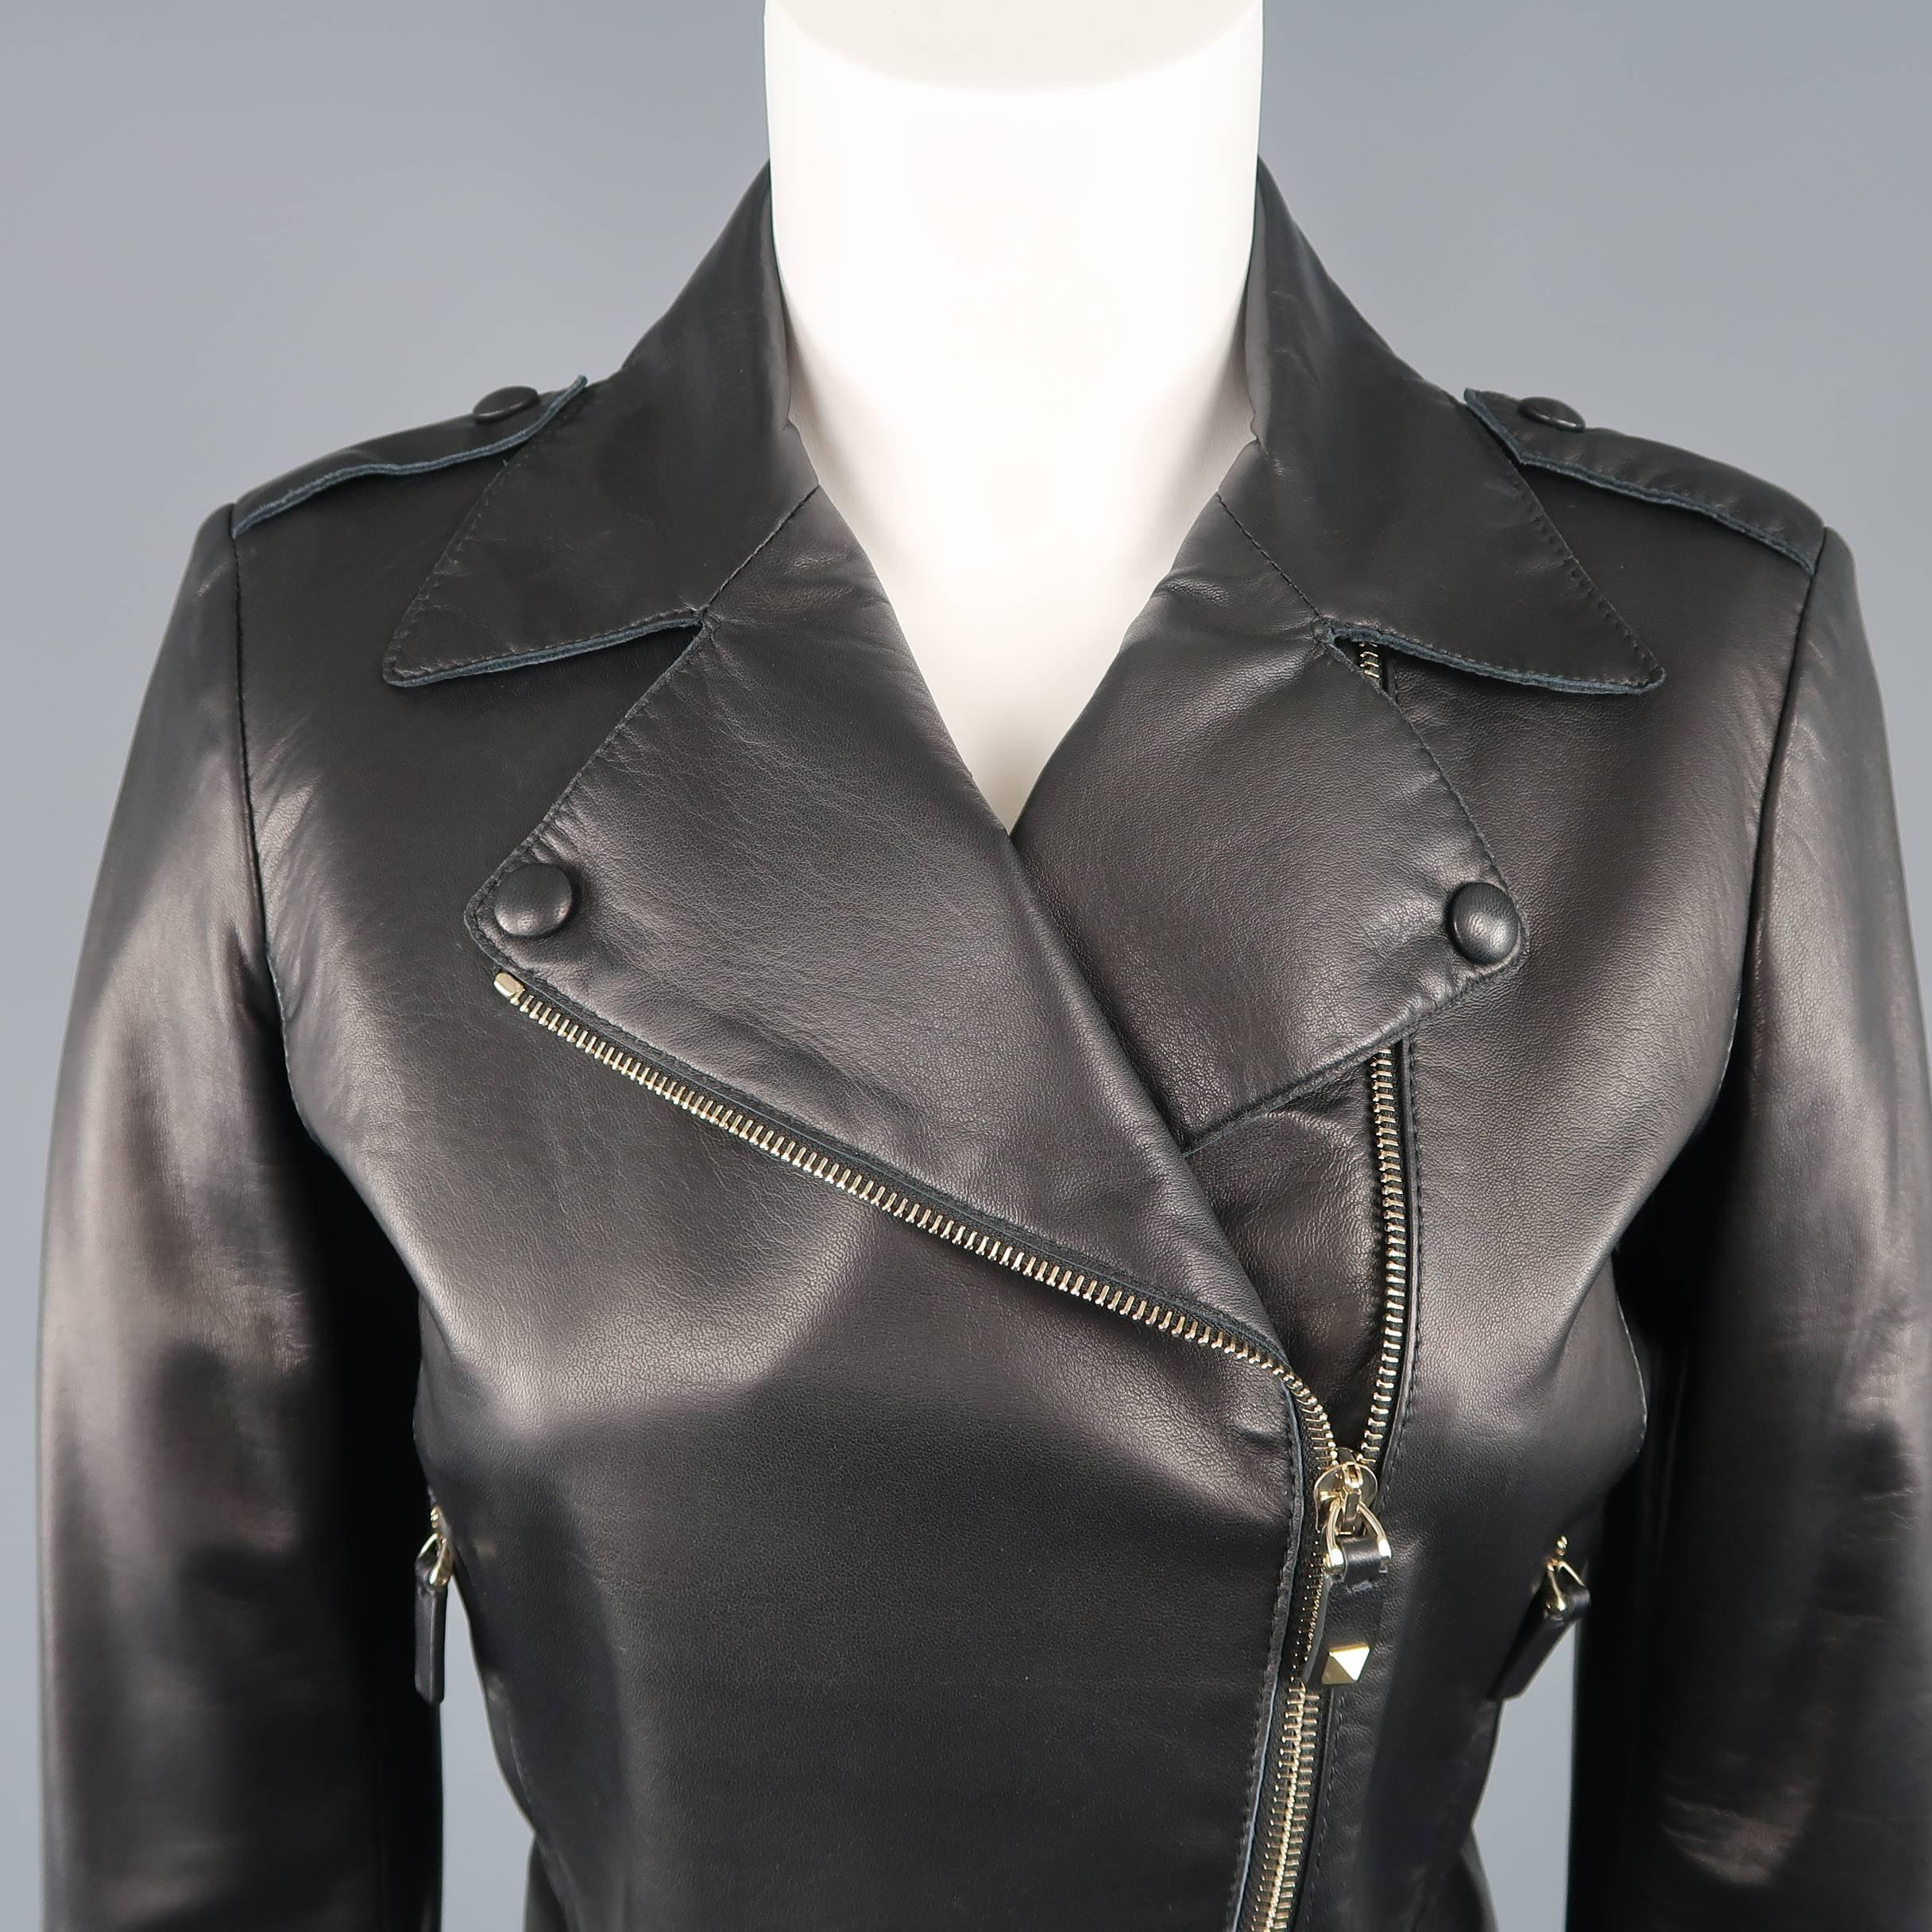 Valentino cropped biker jacket comes in smooth black leather with a pointed lapel, asymmetrical double zip front, zip pockets, and epaulets. Made in Italy.
 
Good Pre-Owned Condition.
Marked: 4

Measurements:
 
Shoulder: 15 in.
Bust: 35 in.
Sleeve: